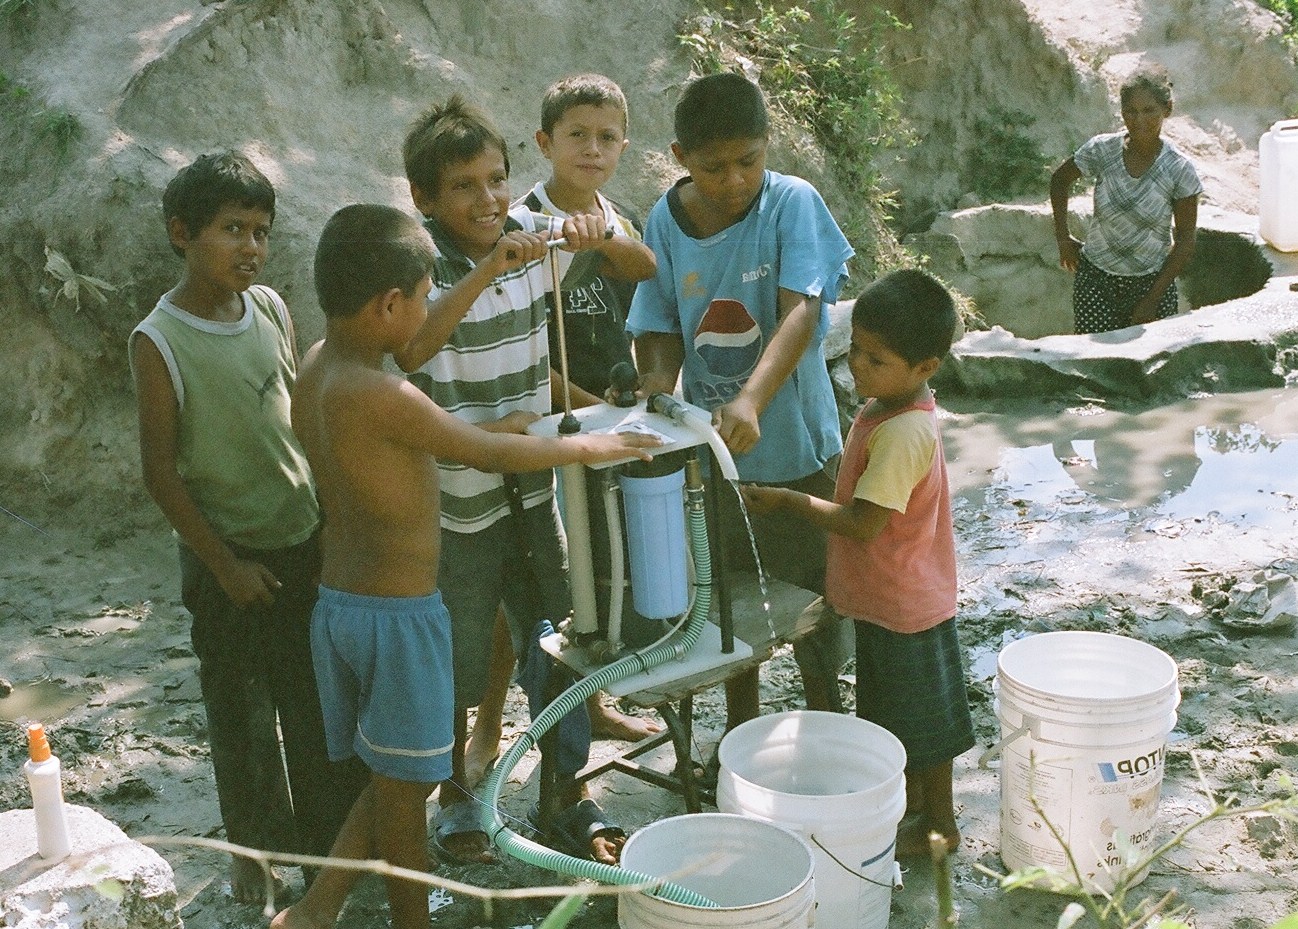 The Grifaid Community Filter in use in Honduras.